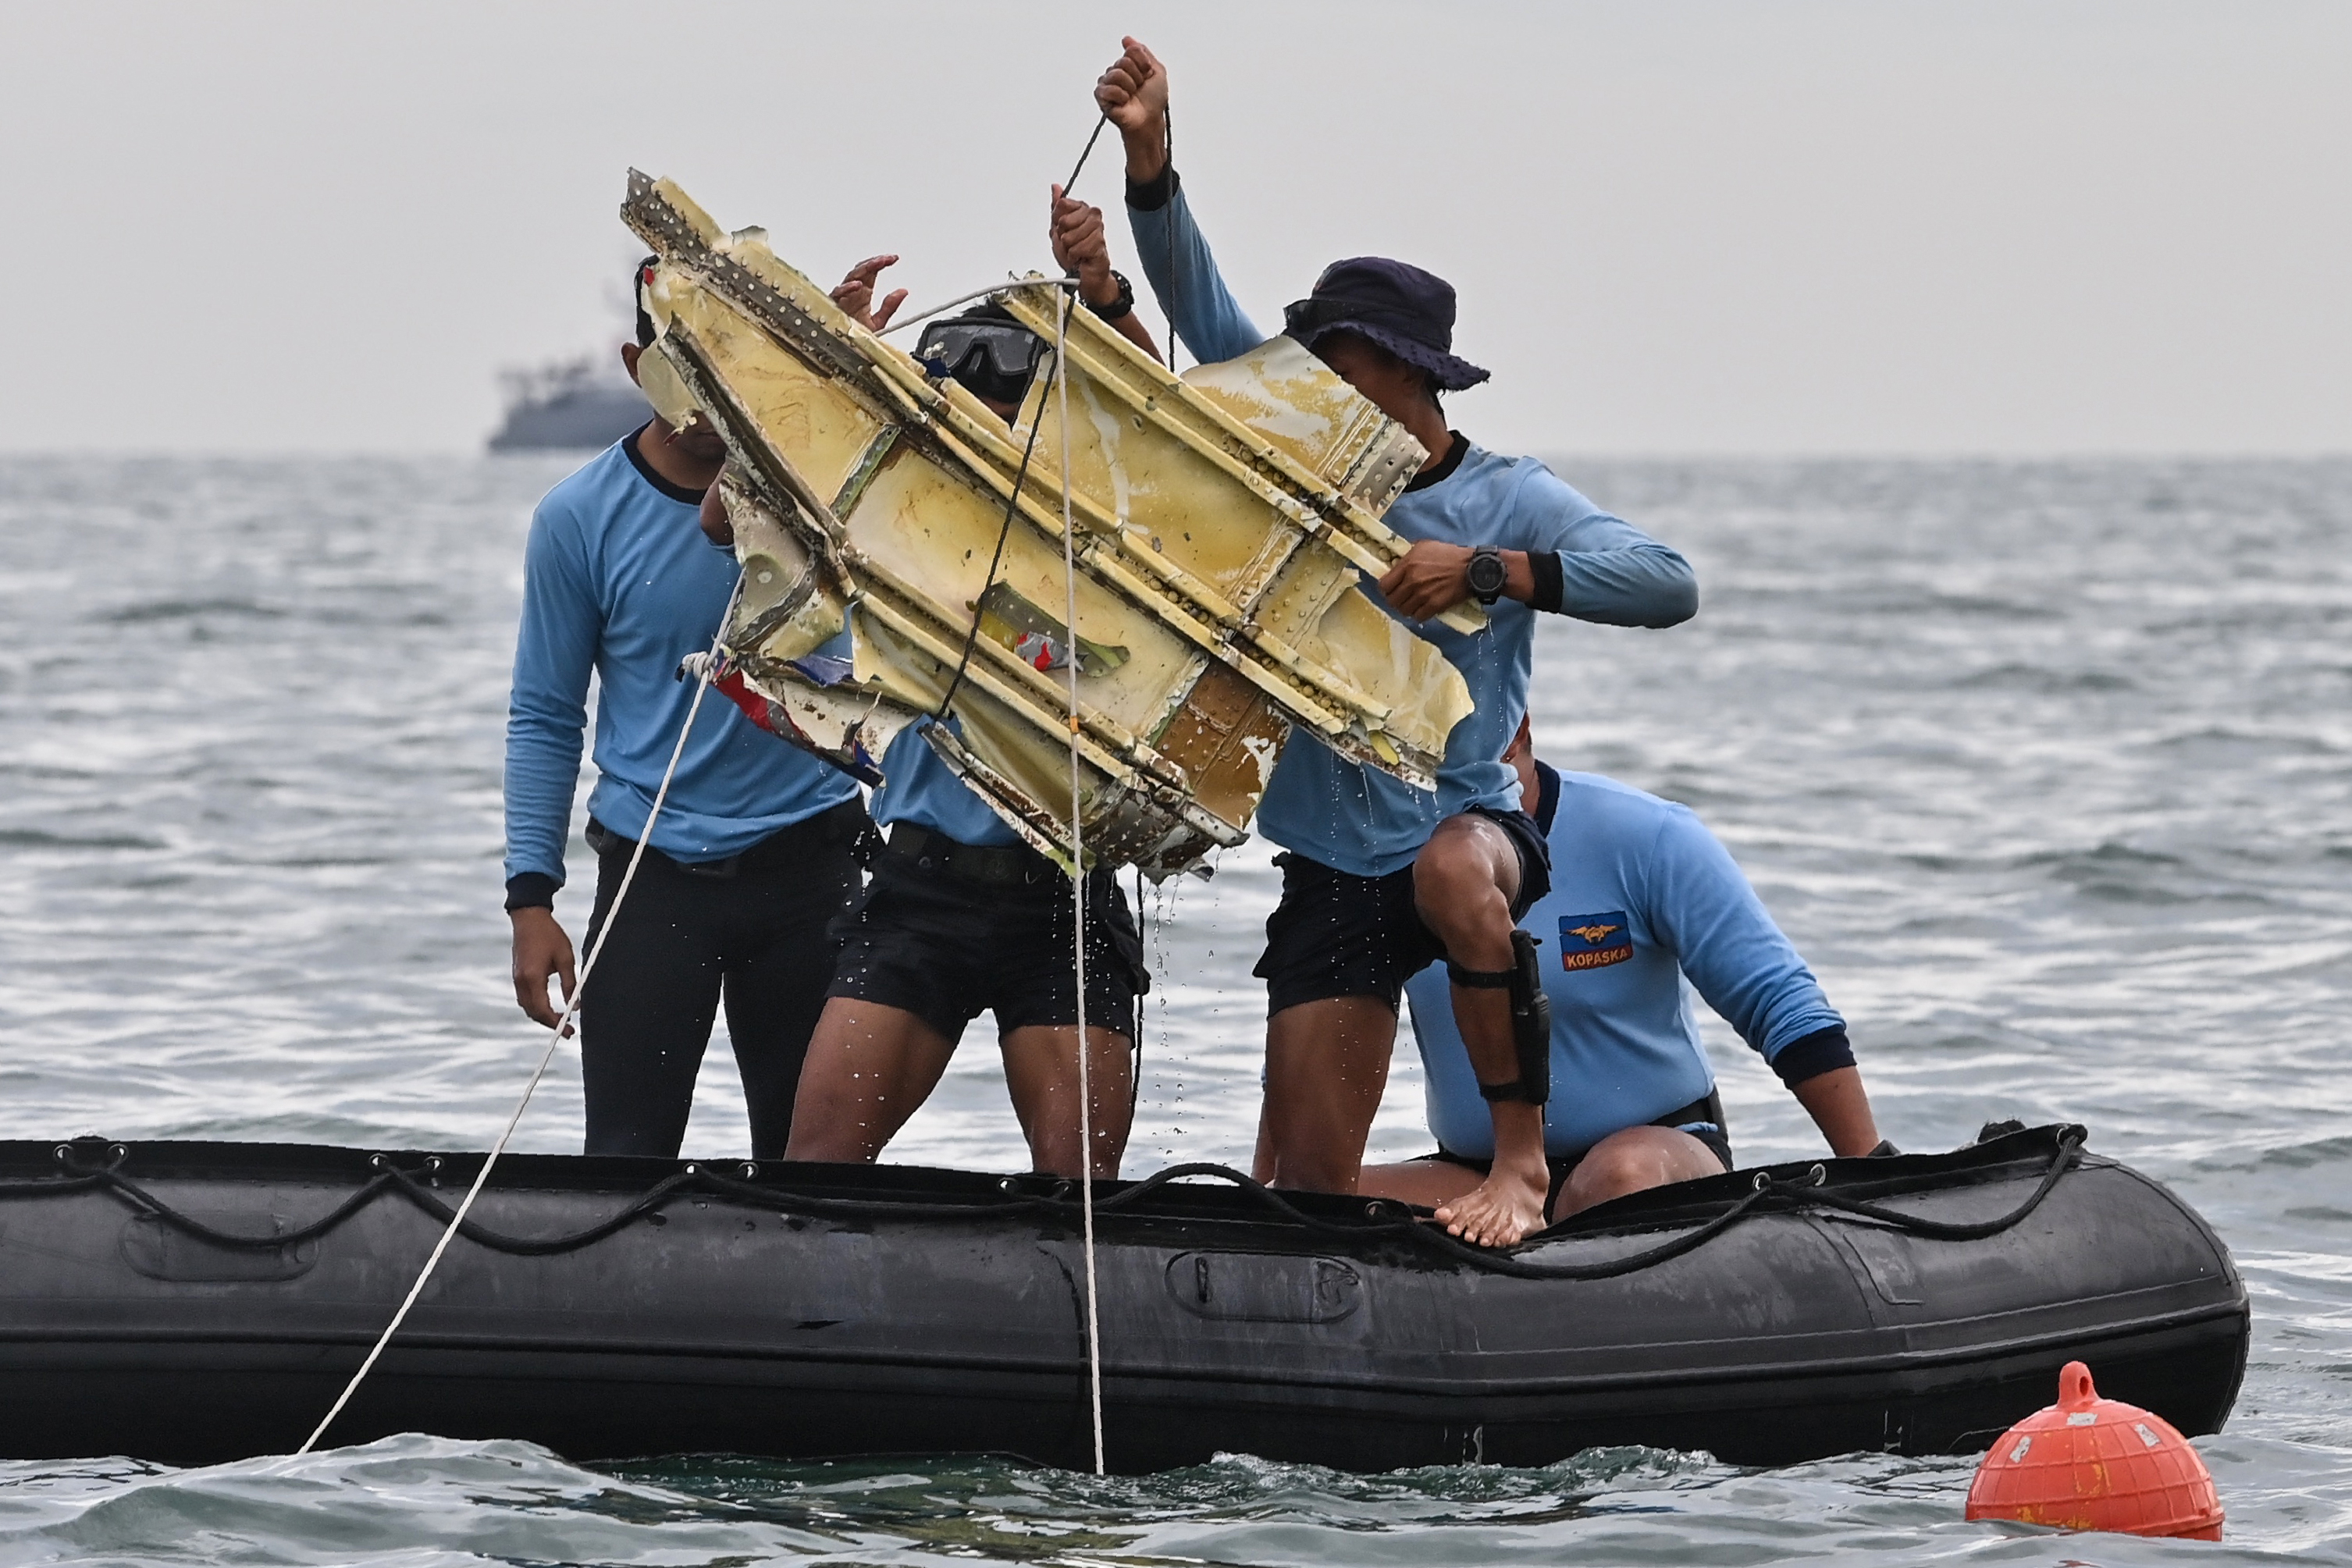 Indonesian navy divers hold up wreckage. (Photo: AFP / ADEK BERRY)